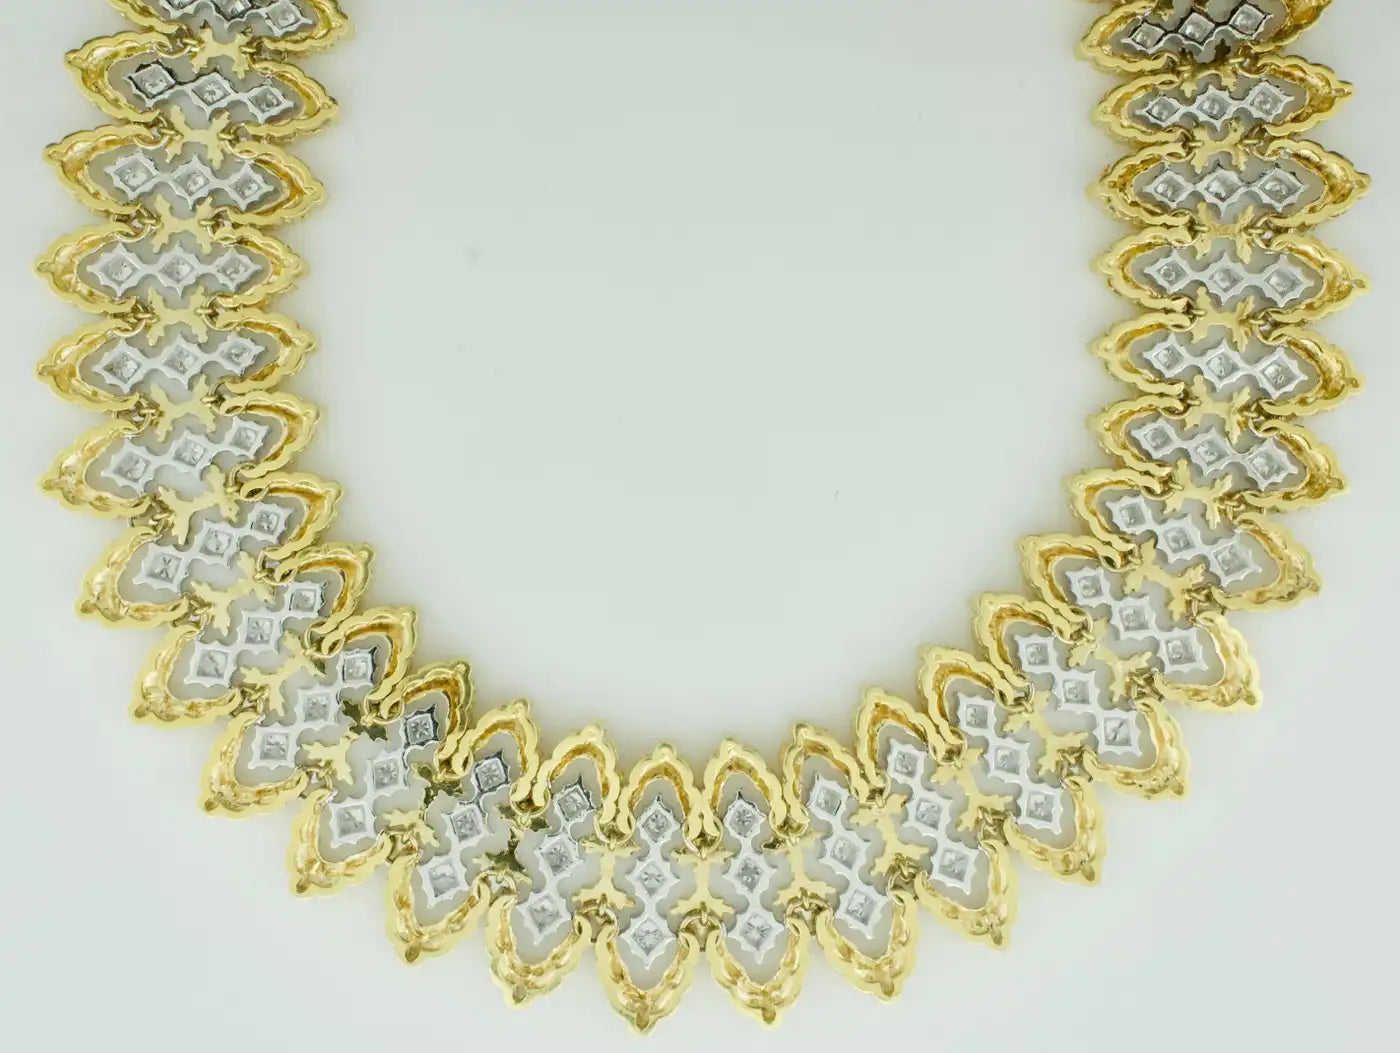 Impressive Heavy Diamond Necklace in 18k Yellow Gold [5 Ounces+] 7.00 carats